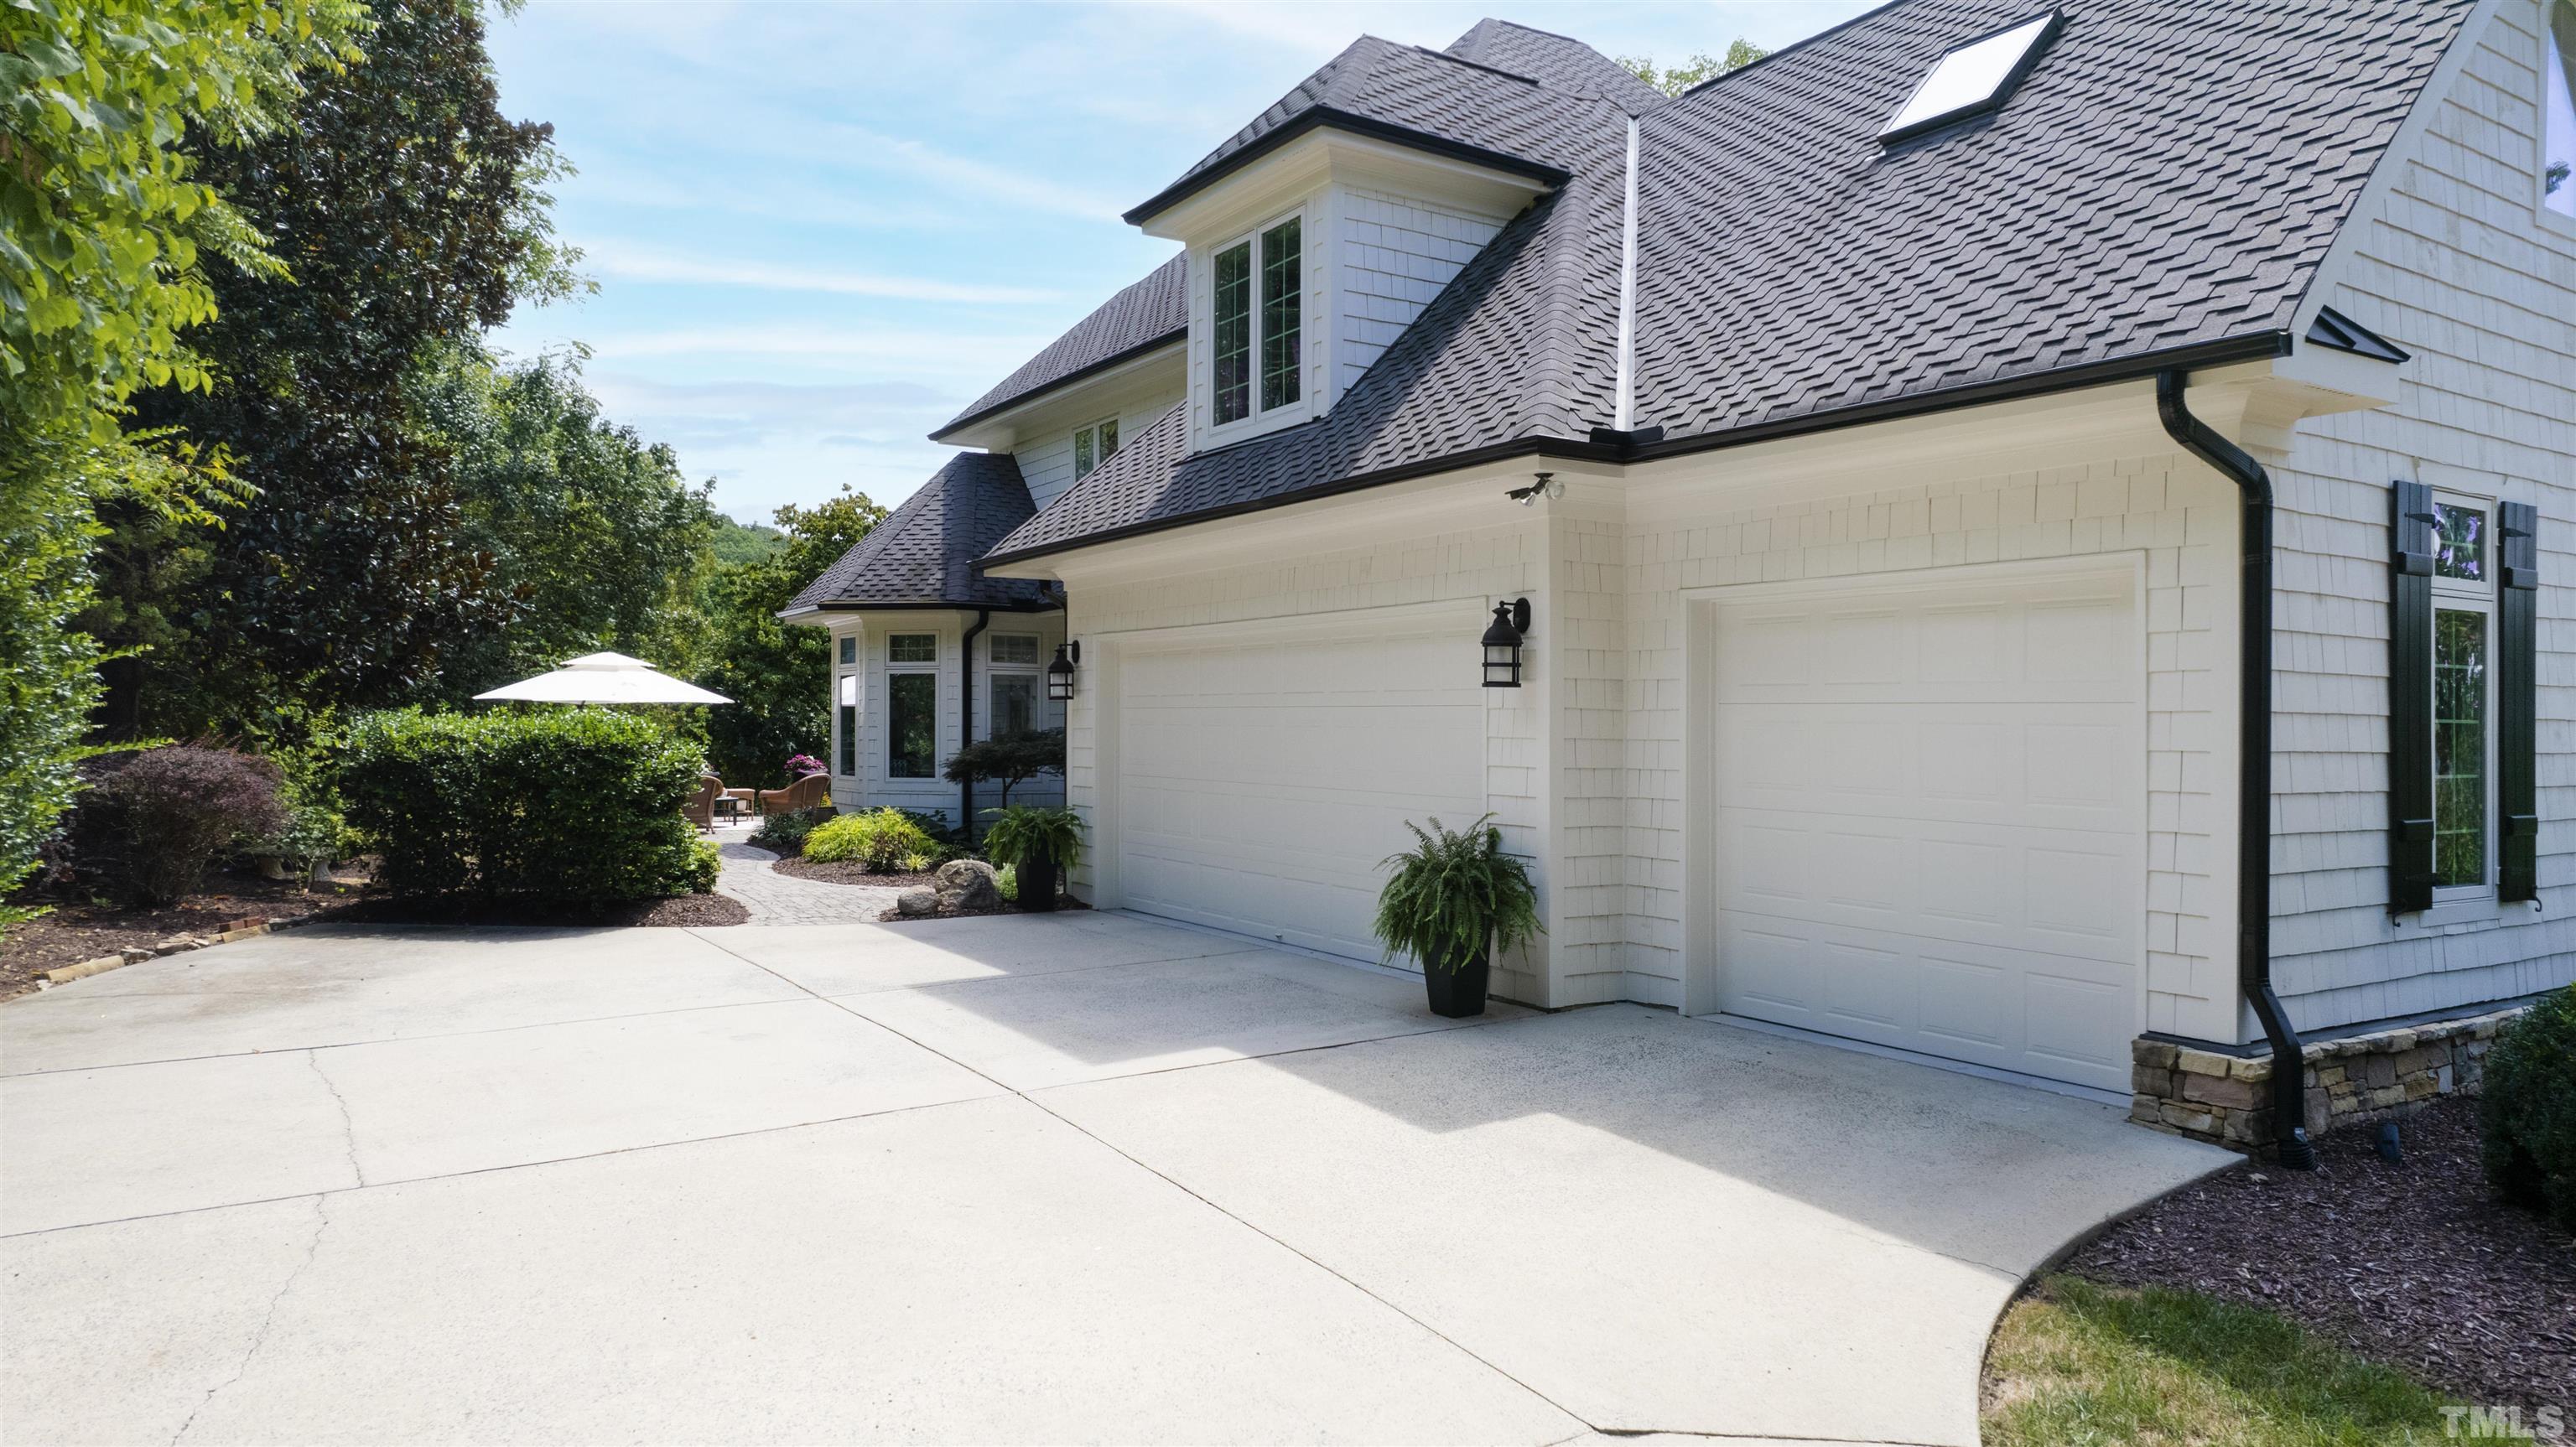 The home features a three-car garage as well.